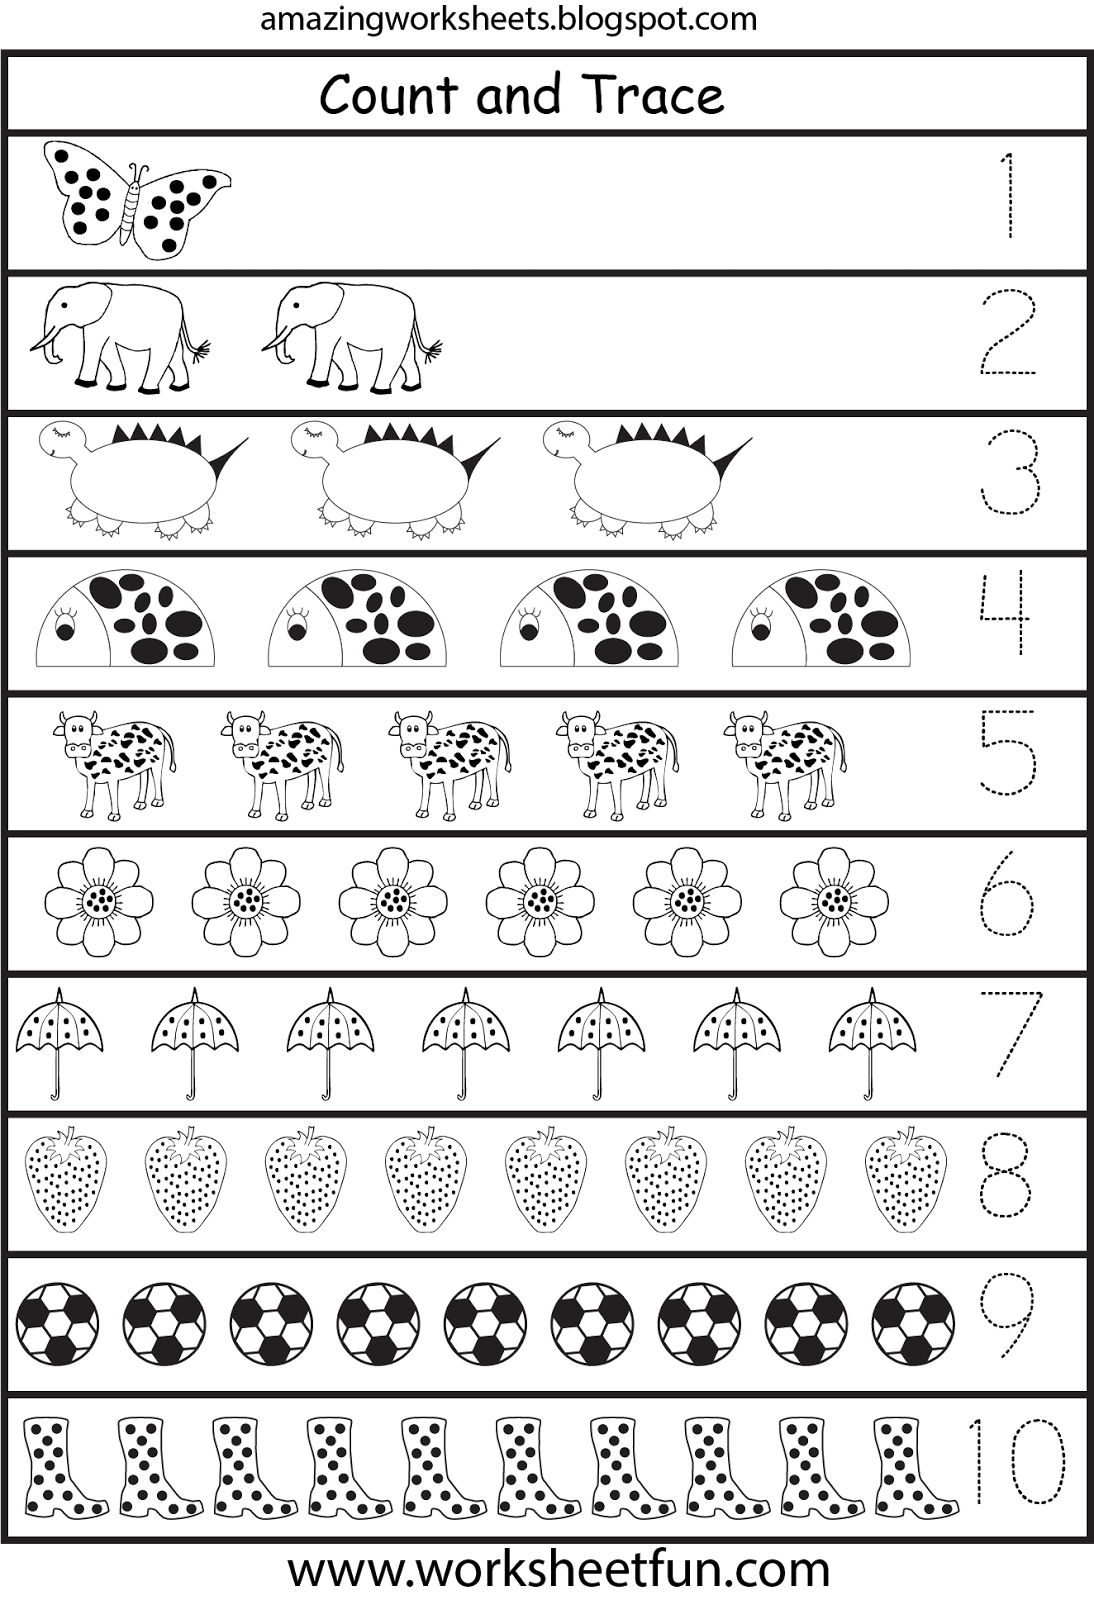 counting-and-tracing-numbers-worksheets-tracing-worksheets